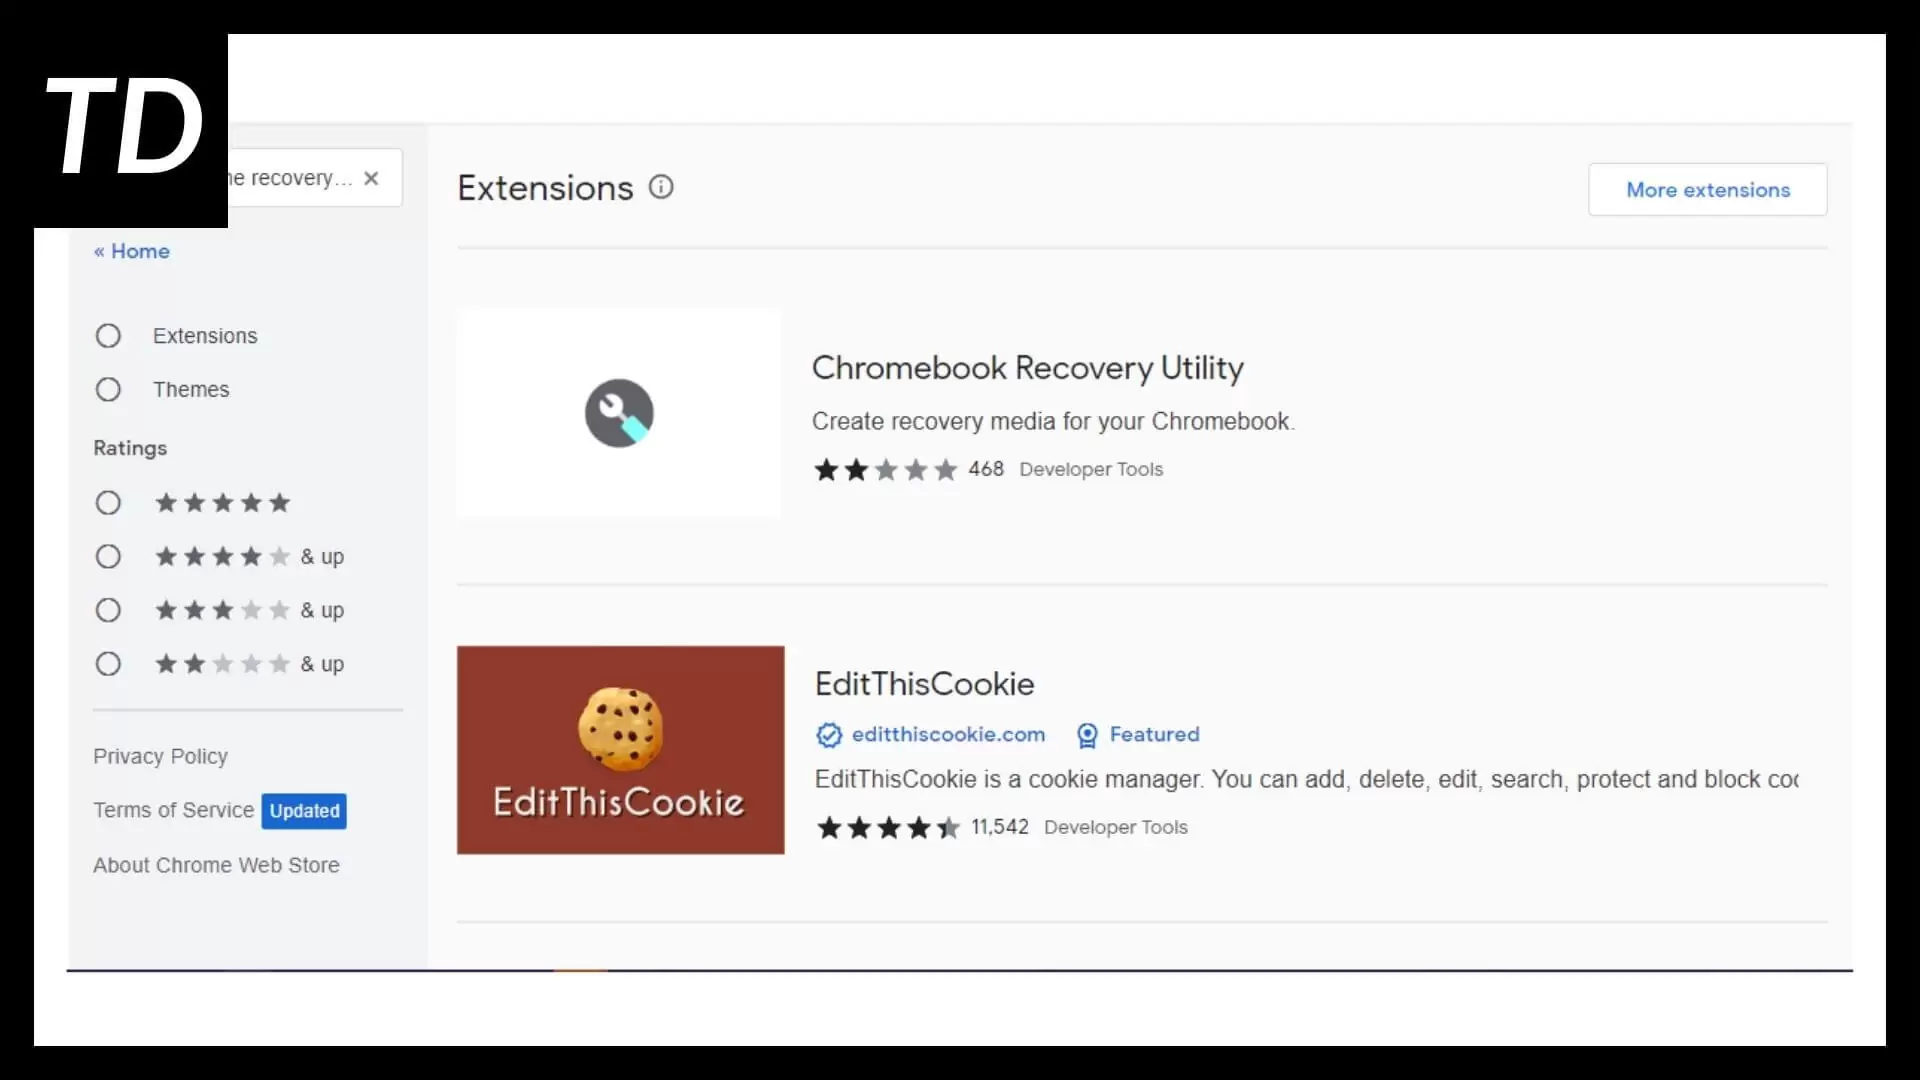 Chrome recovery utility available from search